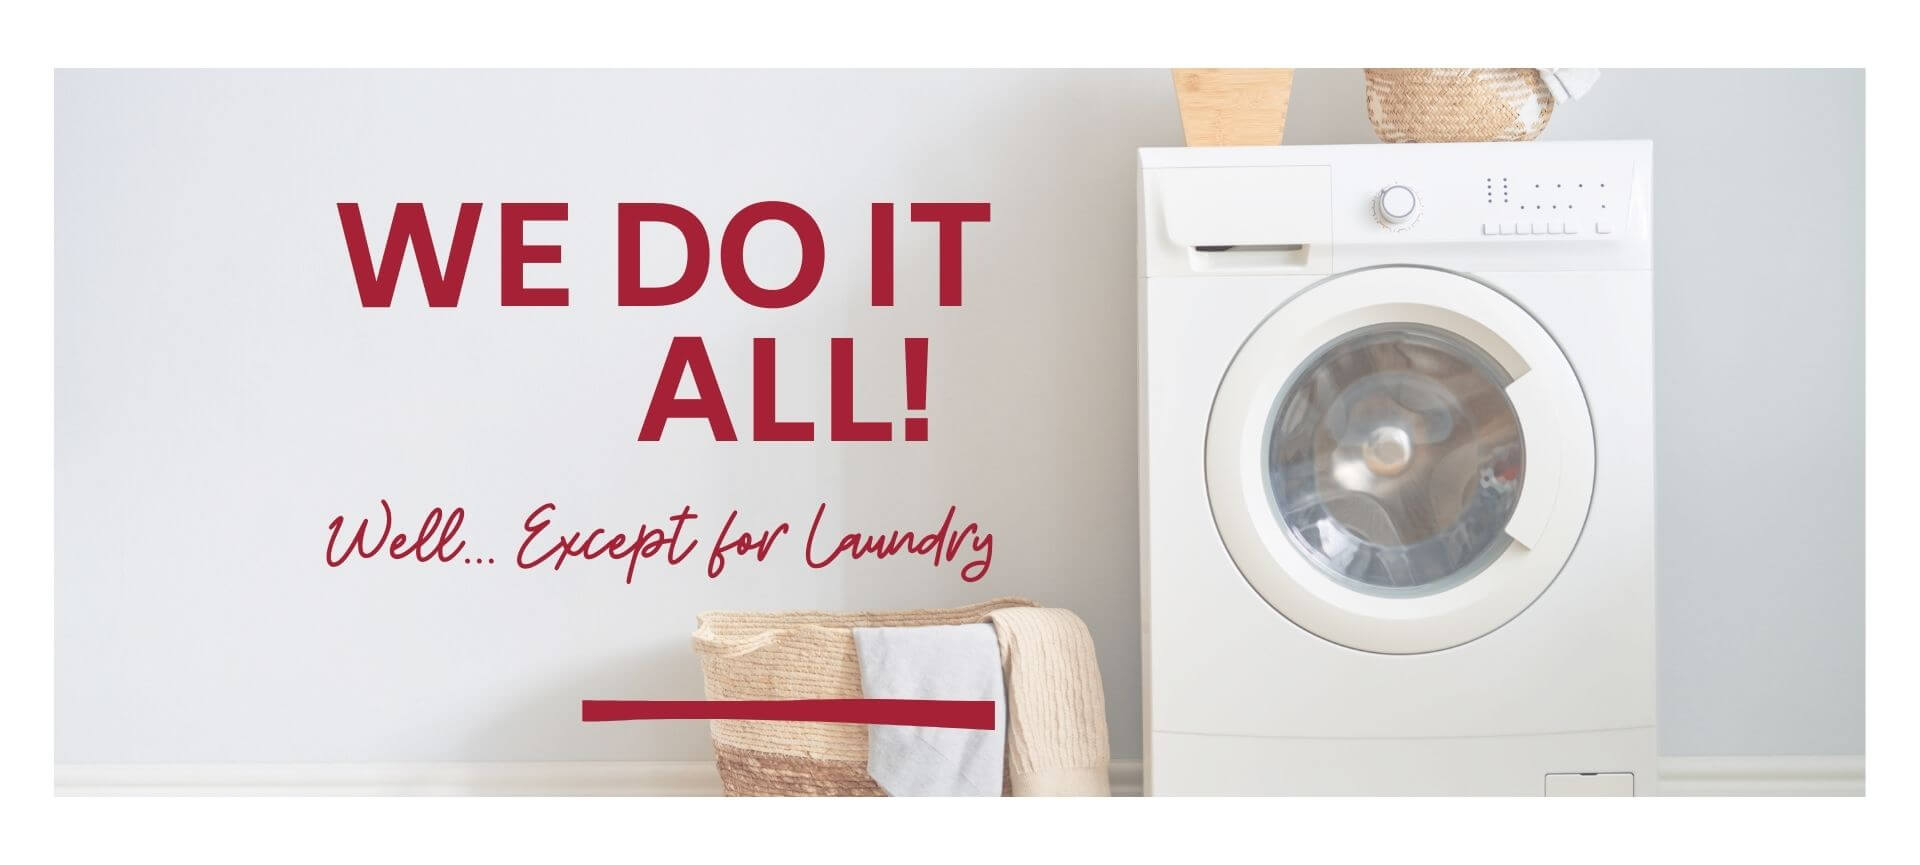 We Do it ALL! Well... Except for Laundry